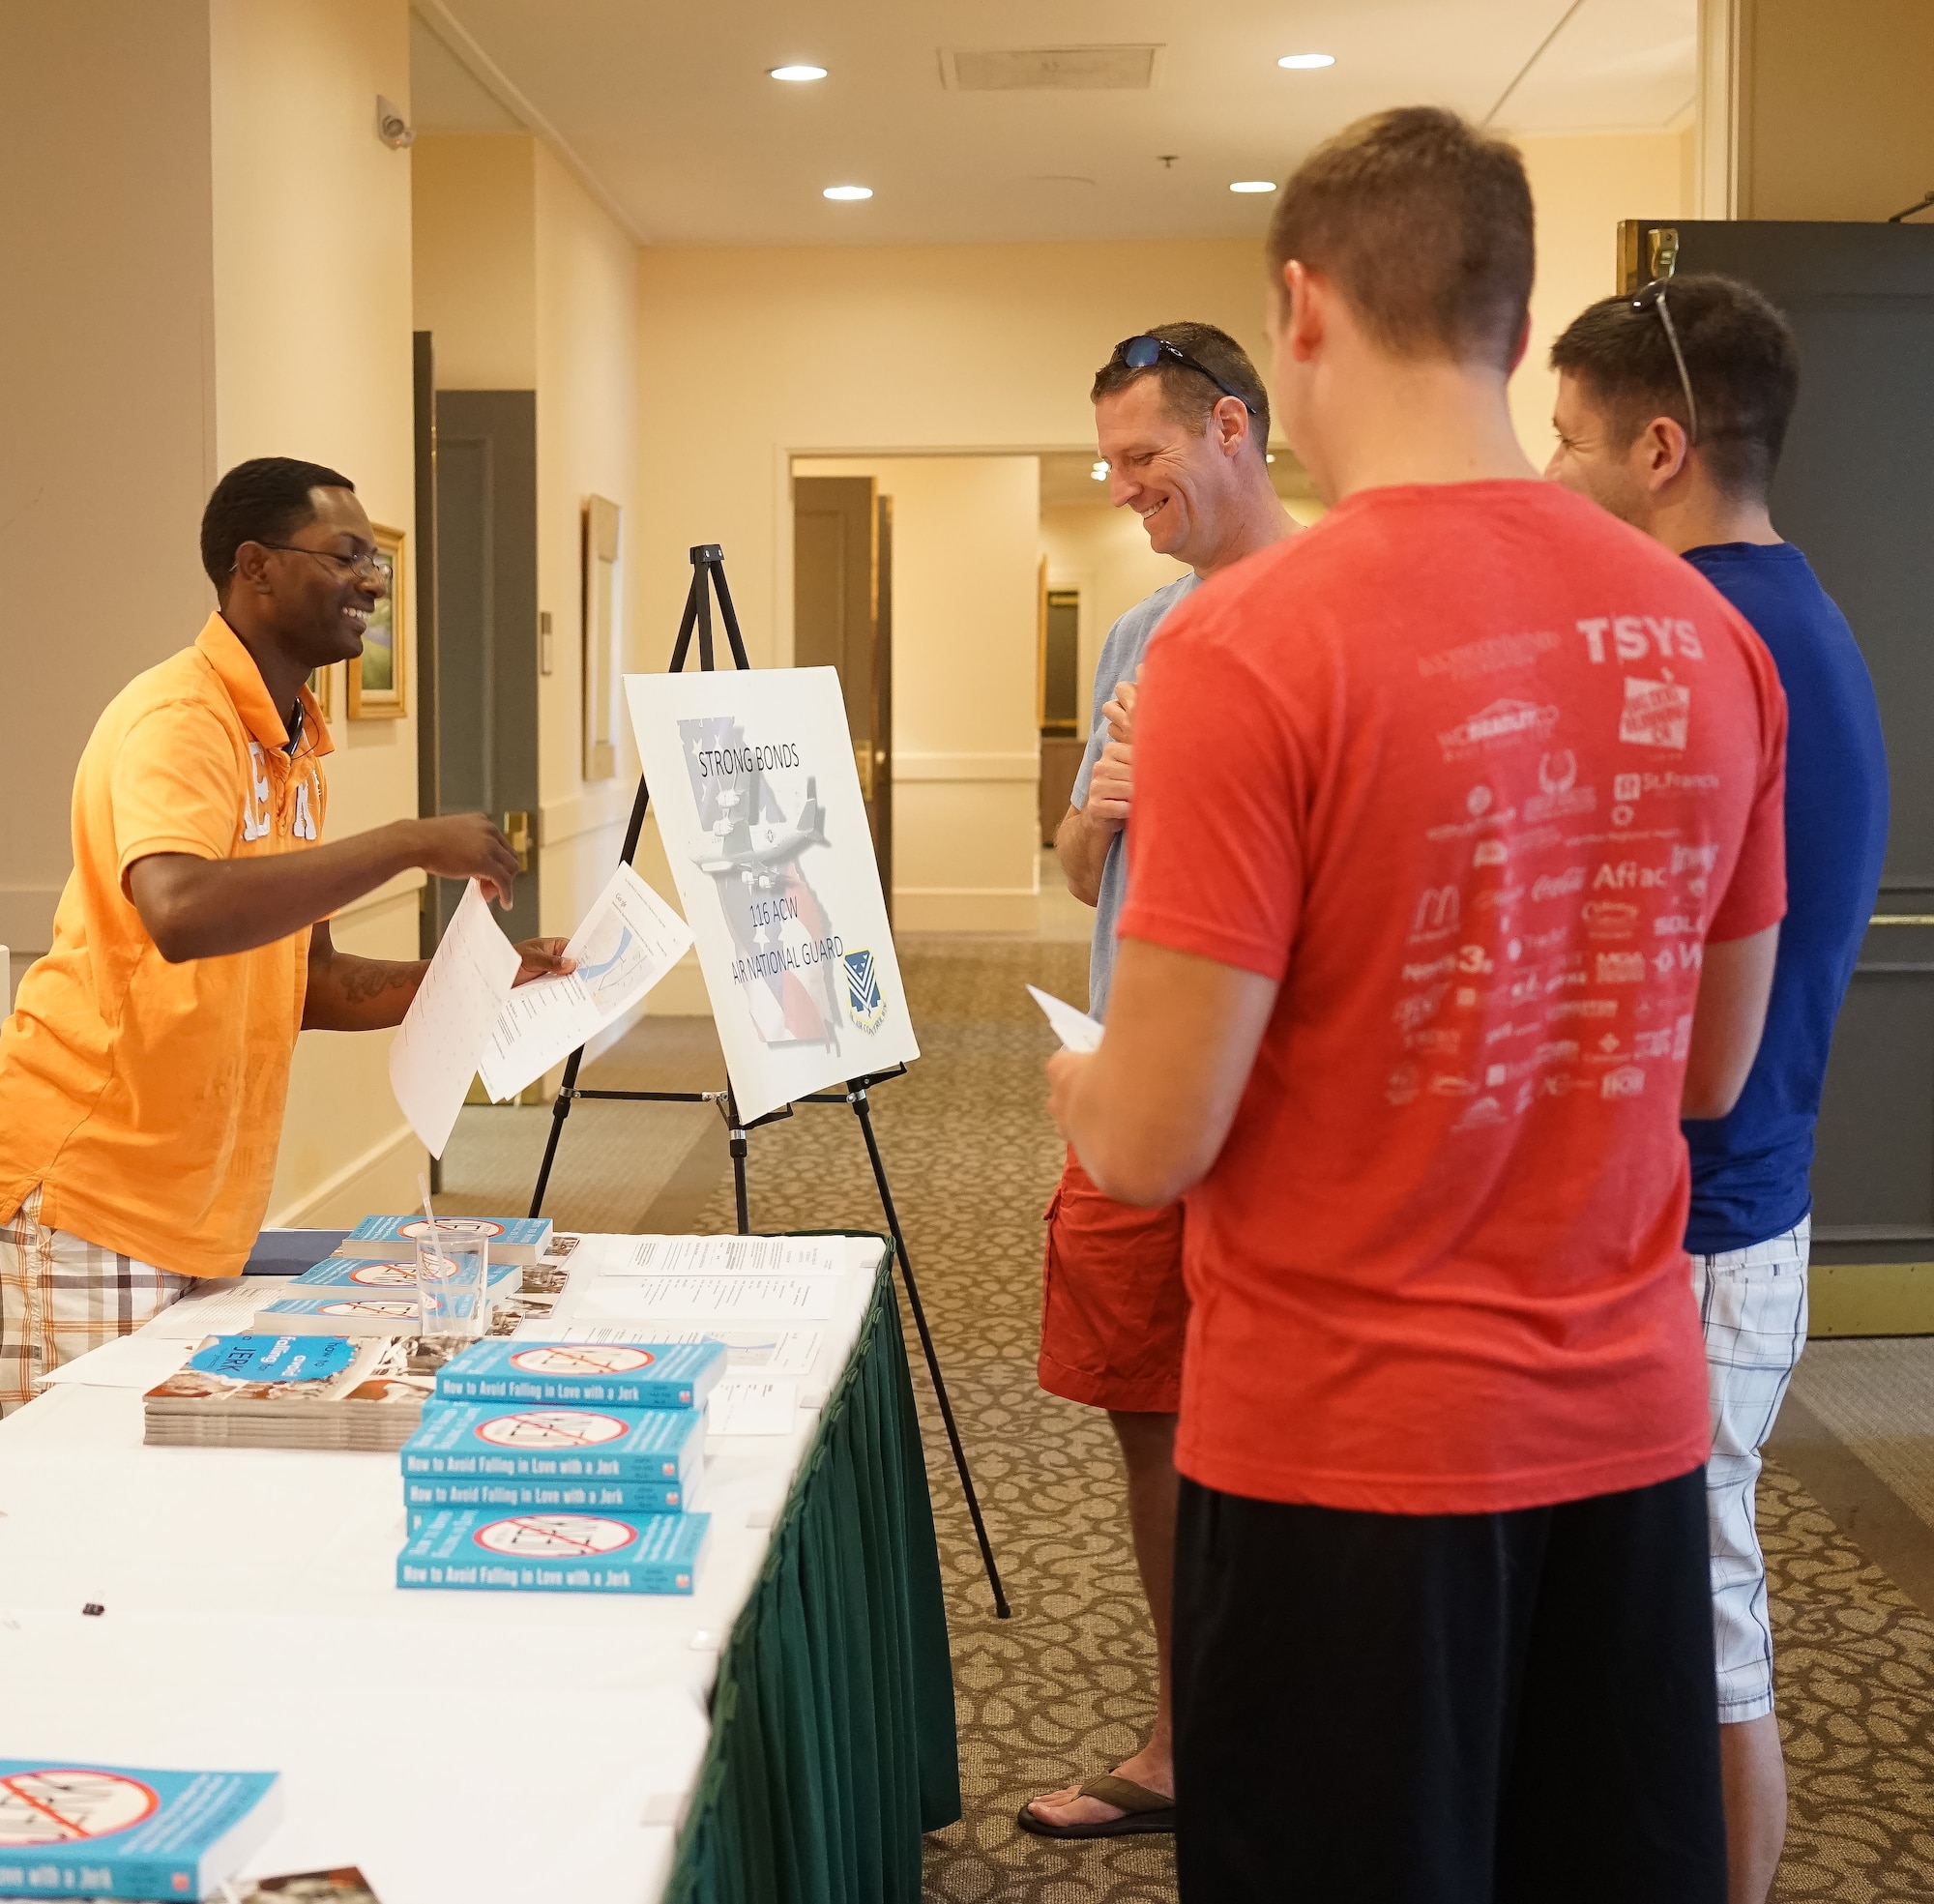 U.S. Air Force Technical Sgt. Steven Battle, 116th Air Control Wing chaplains assistant, Georgia Air National Guard, assists Airmen arriving for the Strong Bonds singles retreat at the Sea Palms Resort, Saint Simons Island, Ga., June 26, 2015. The retreat, hosted by chaplains from the 116th Air Control wing, is a key component of the unit's resiliency program aimed at helping Airmen from Air National Guard units across Georgia to build relationships, learn to trust people, and hone their teambuilding skills. (U.S. Air National Guard photo by Senior Master Sgt. Roger Parsons/Released)